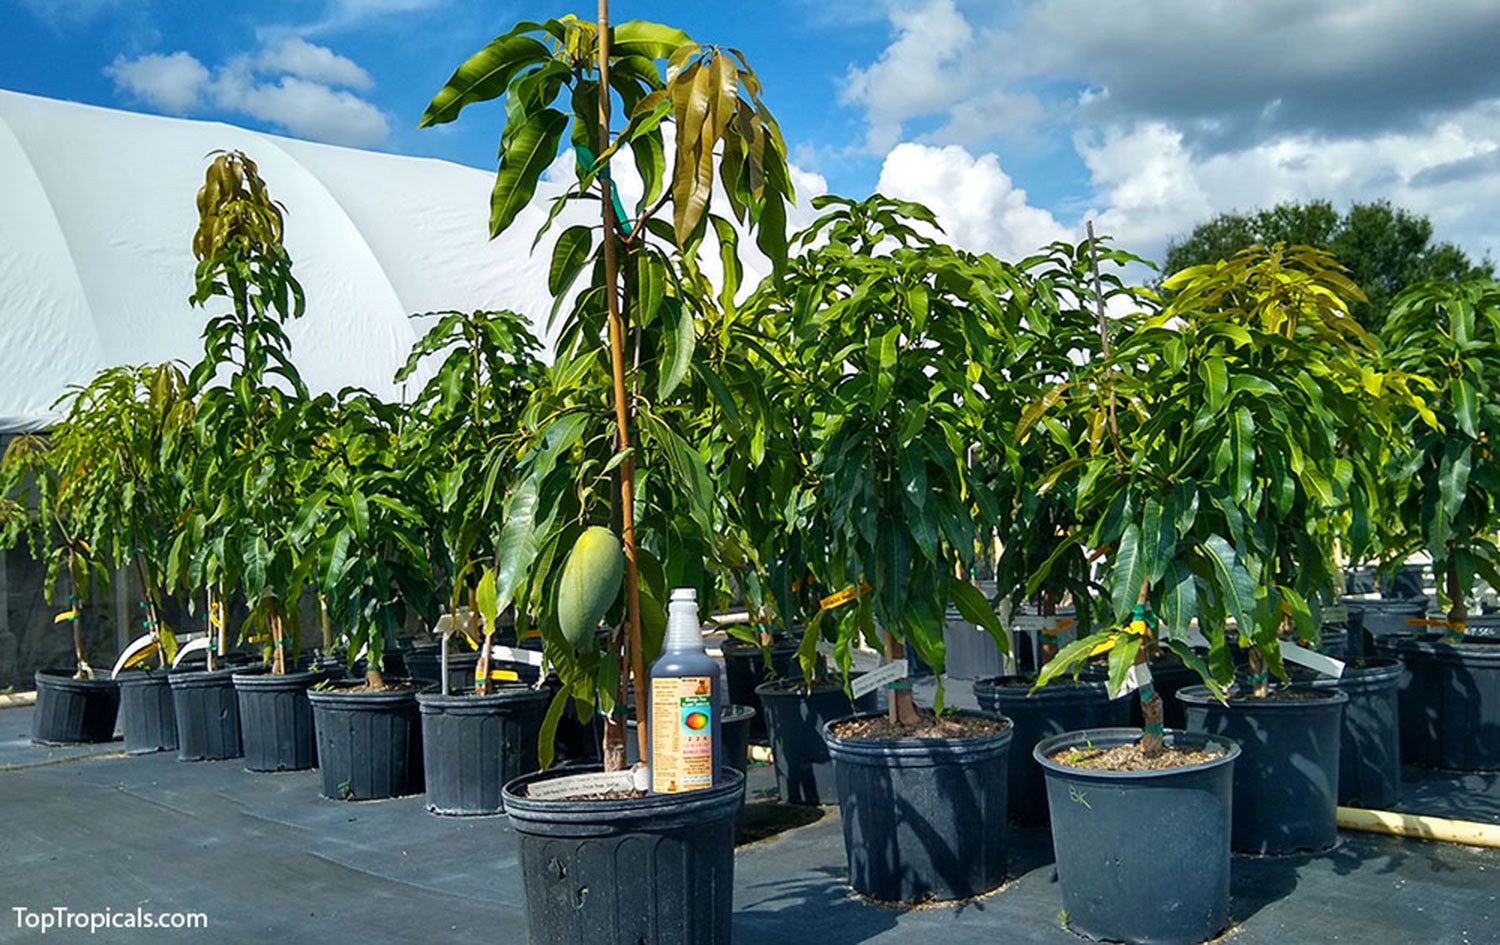 Mango trees in pots and fertilizer